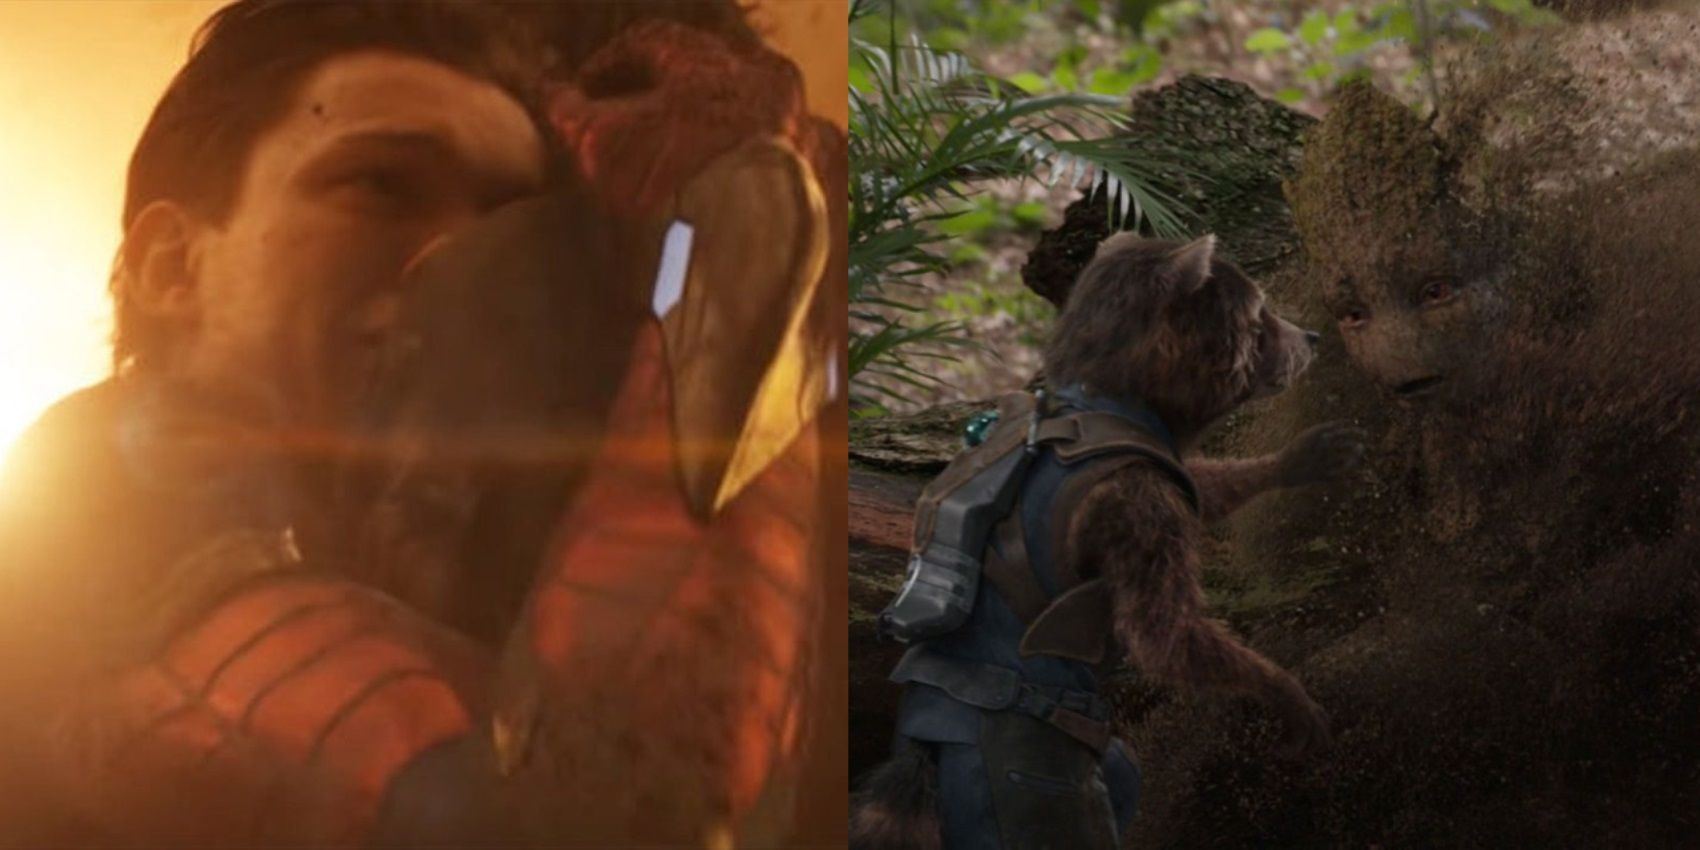 Split image of Spider-Man hugging Iron Man and Groot turning to dust in Avengers Infinity War